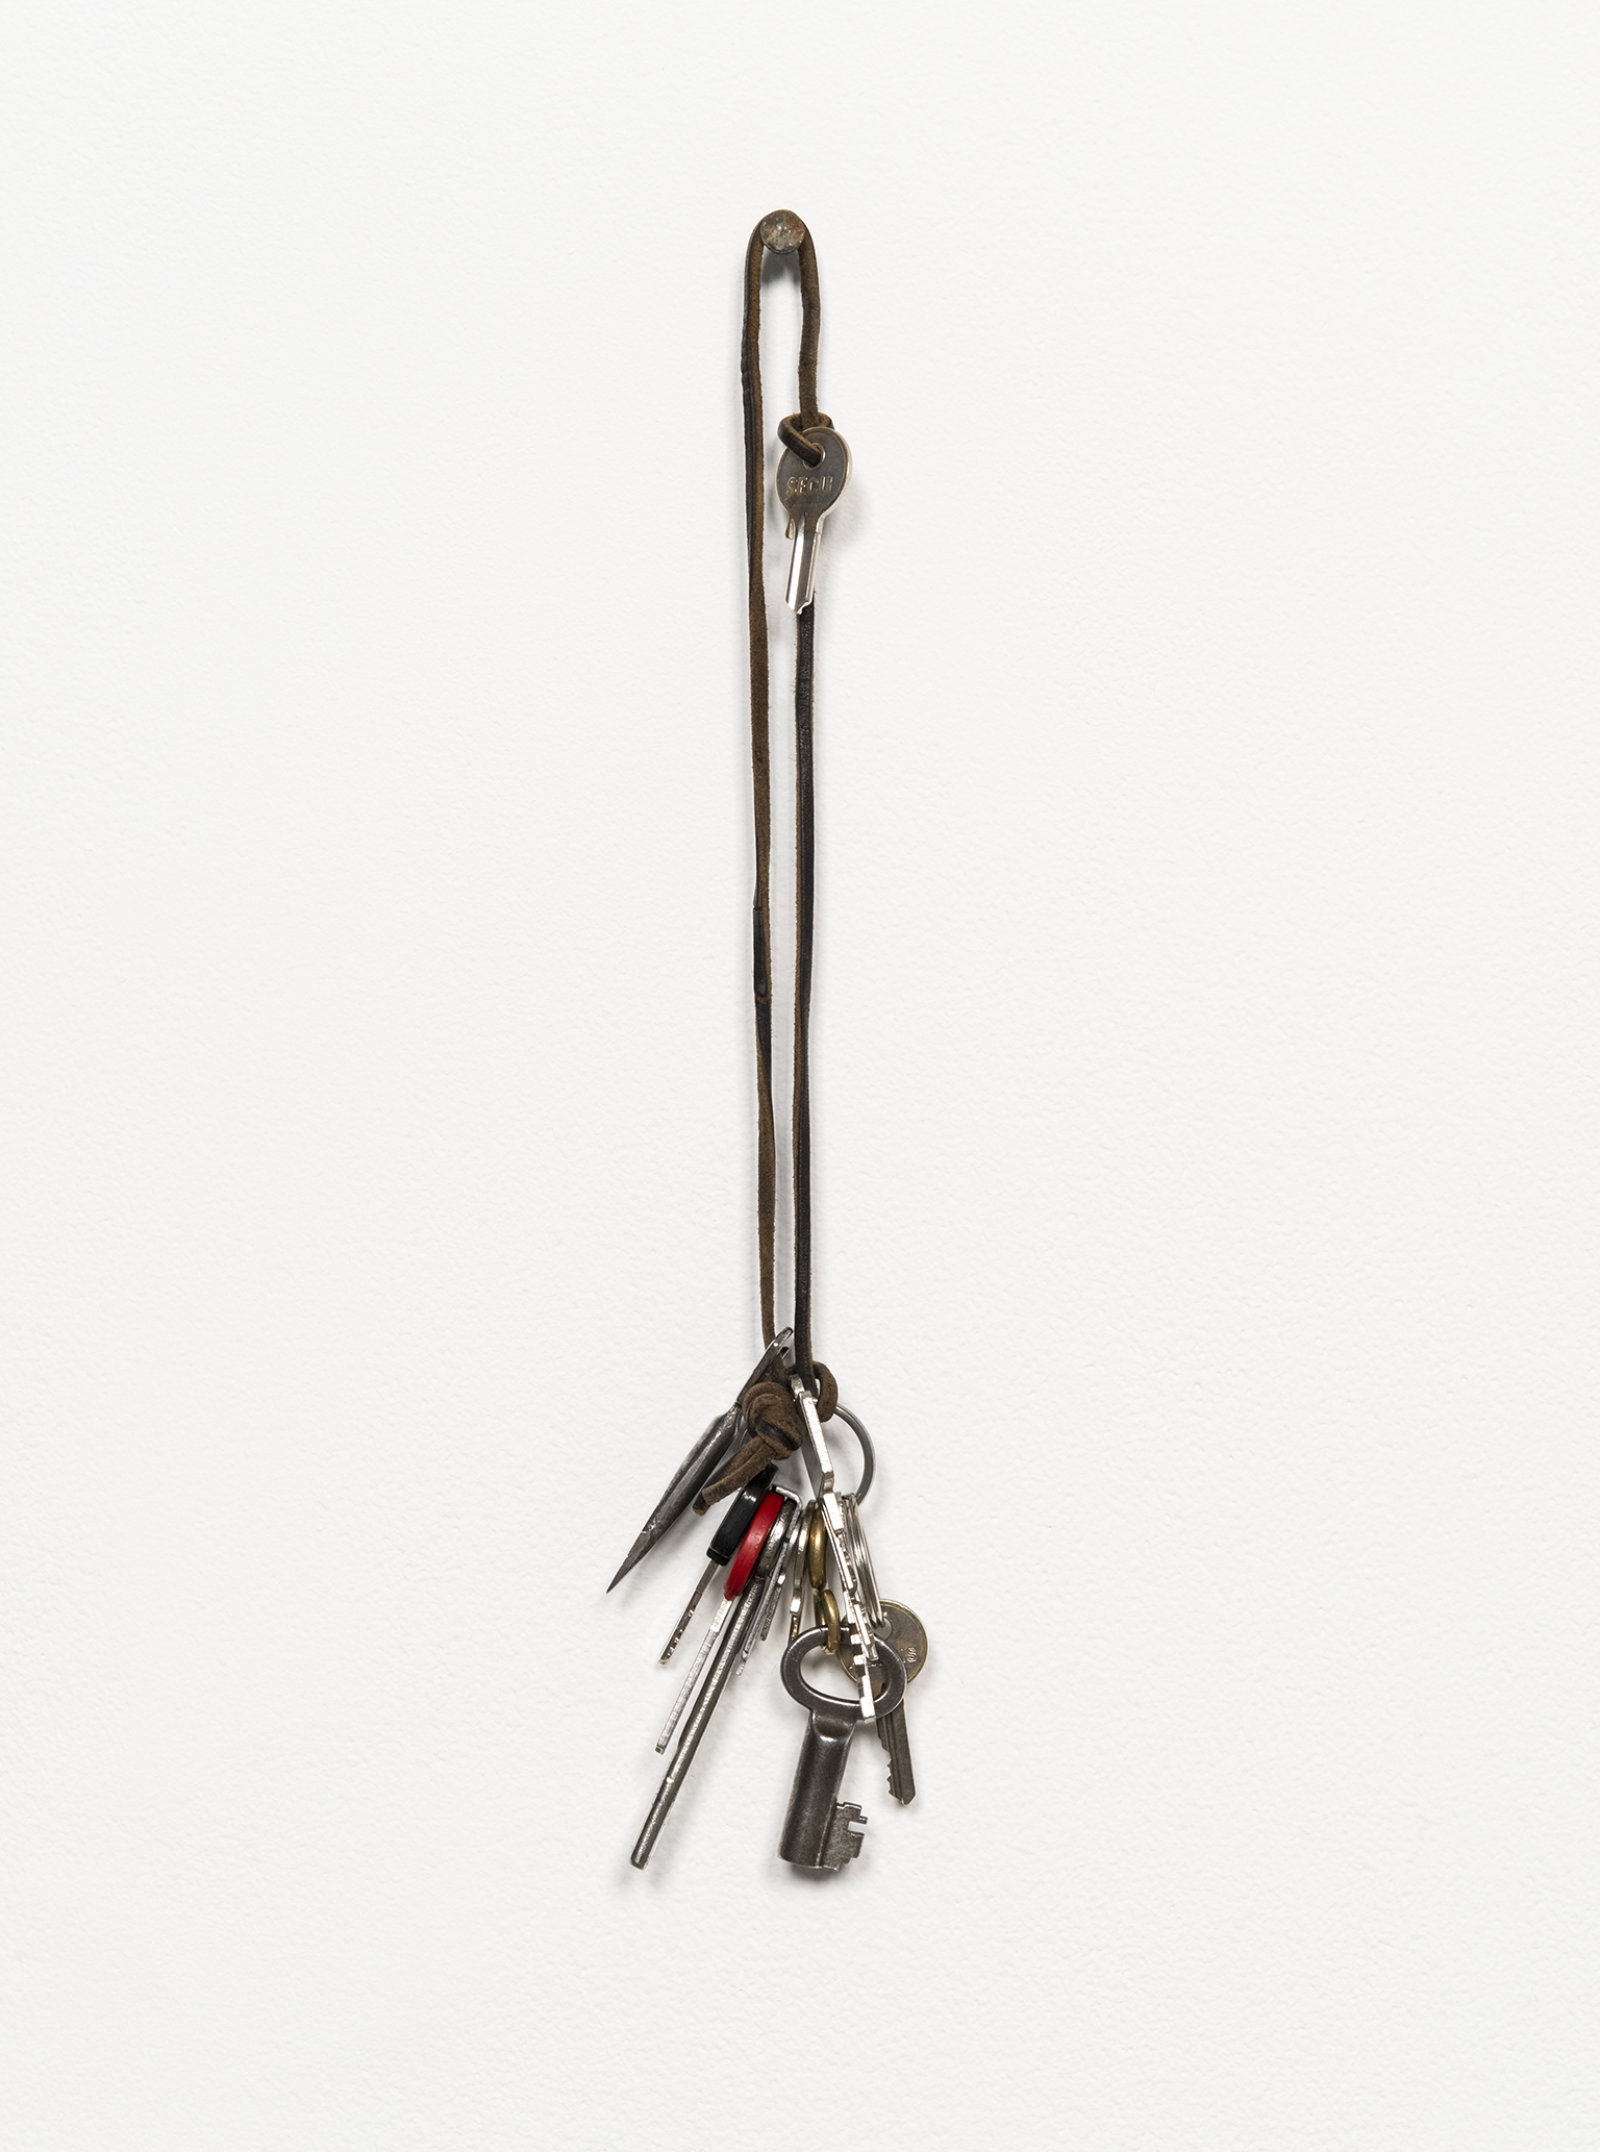 Ashes Withyman, Keys from a place, near the buried canal, 2011–2012, keys, leather, 15 x 3 x 2 in. (37 x 8 x 5 cm)